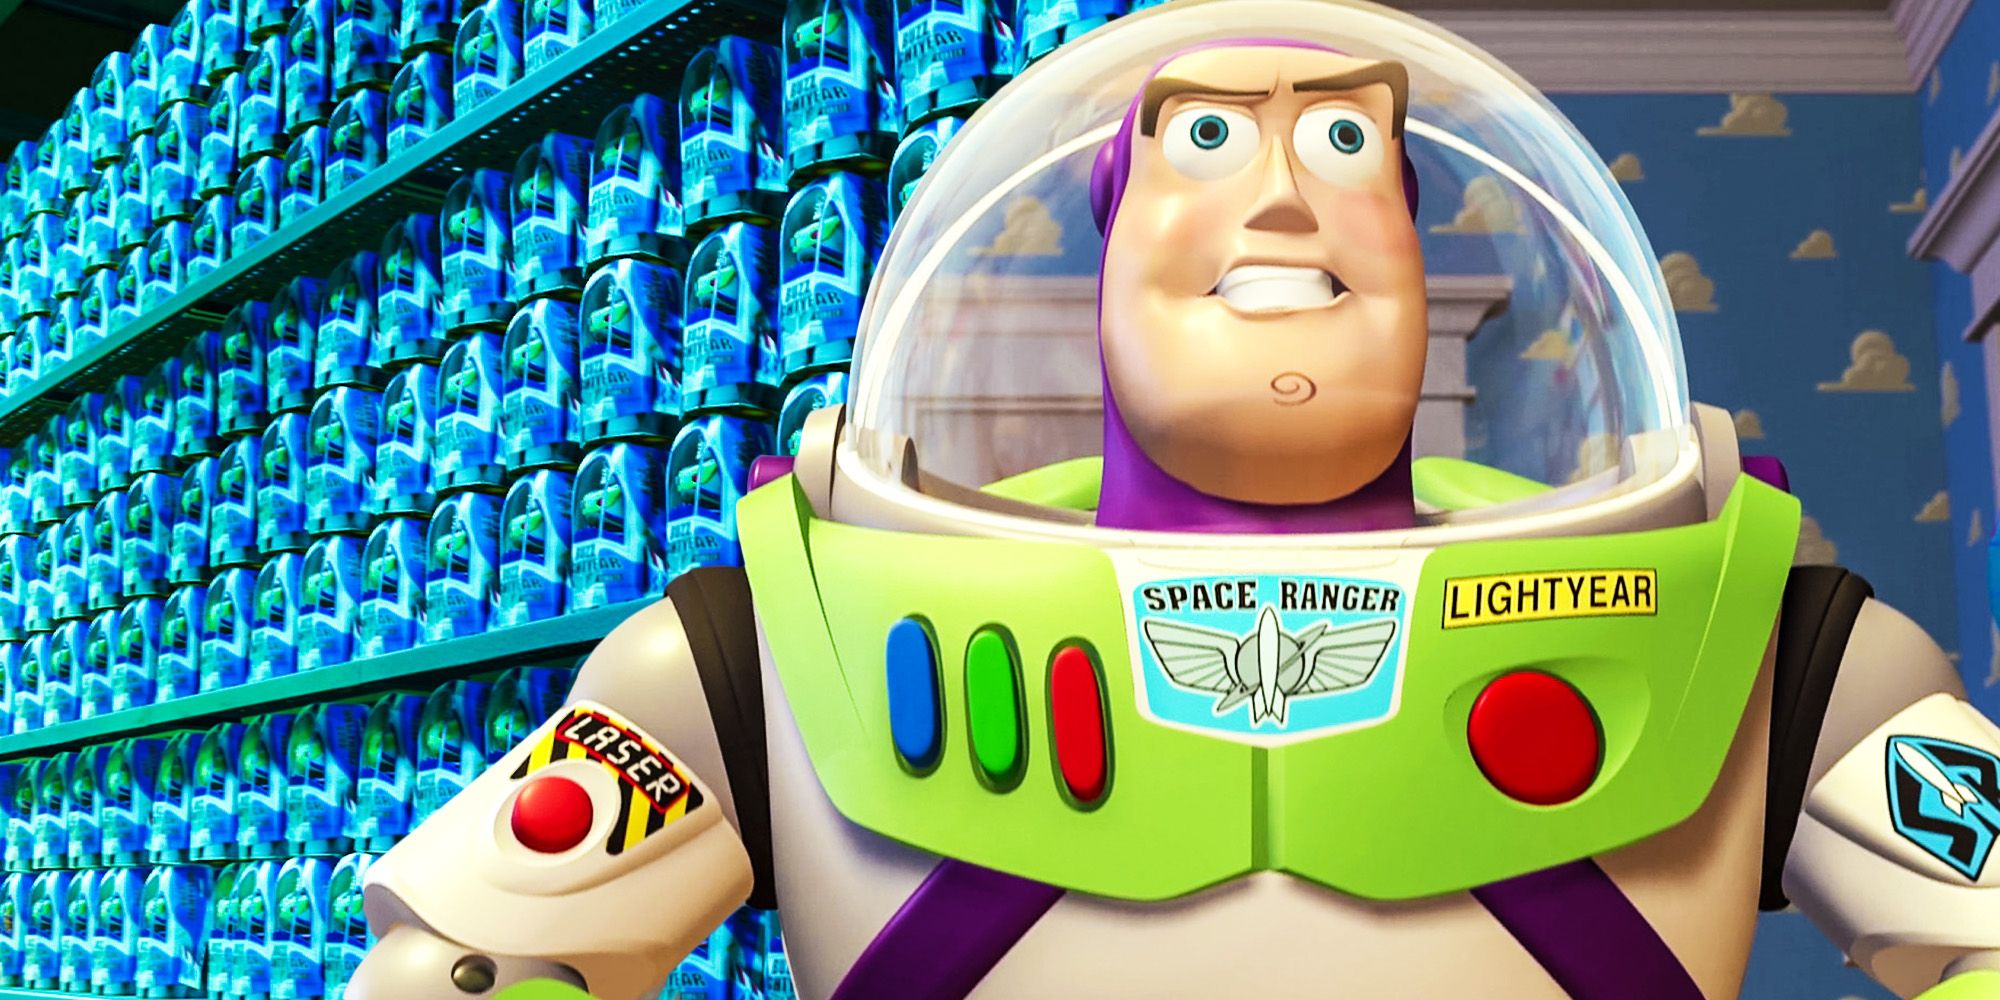 Buzz lightyear stands in front of the alien toys in Toy Story.